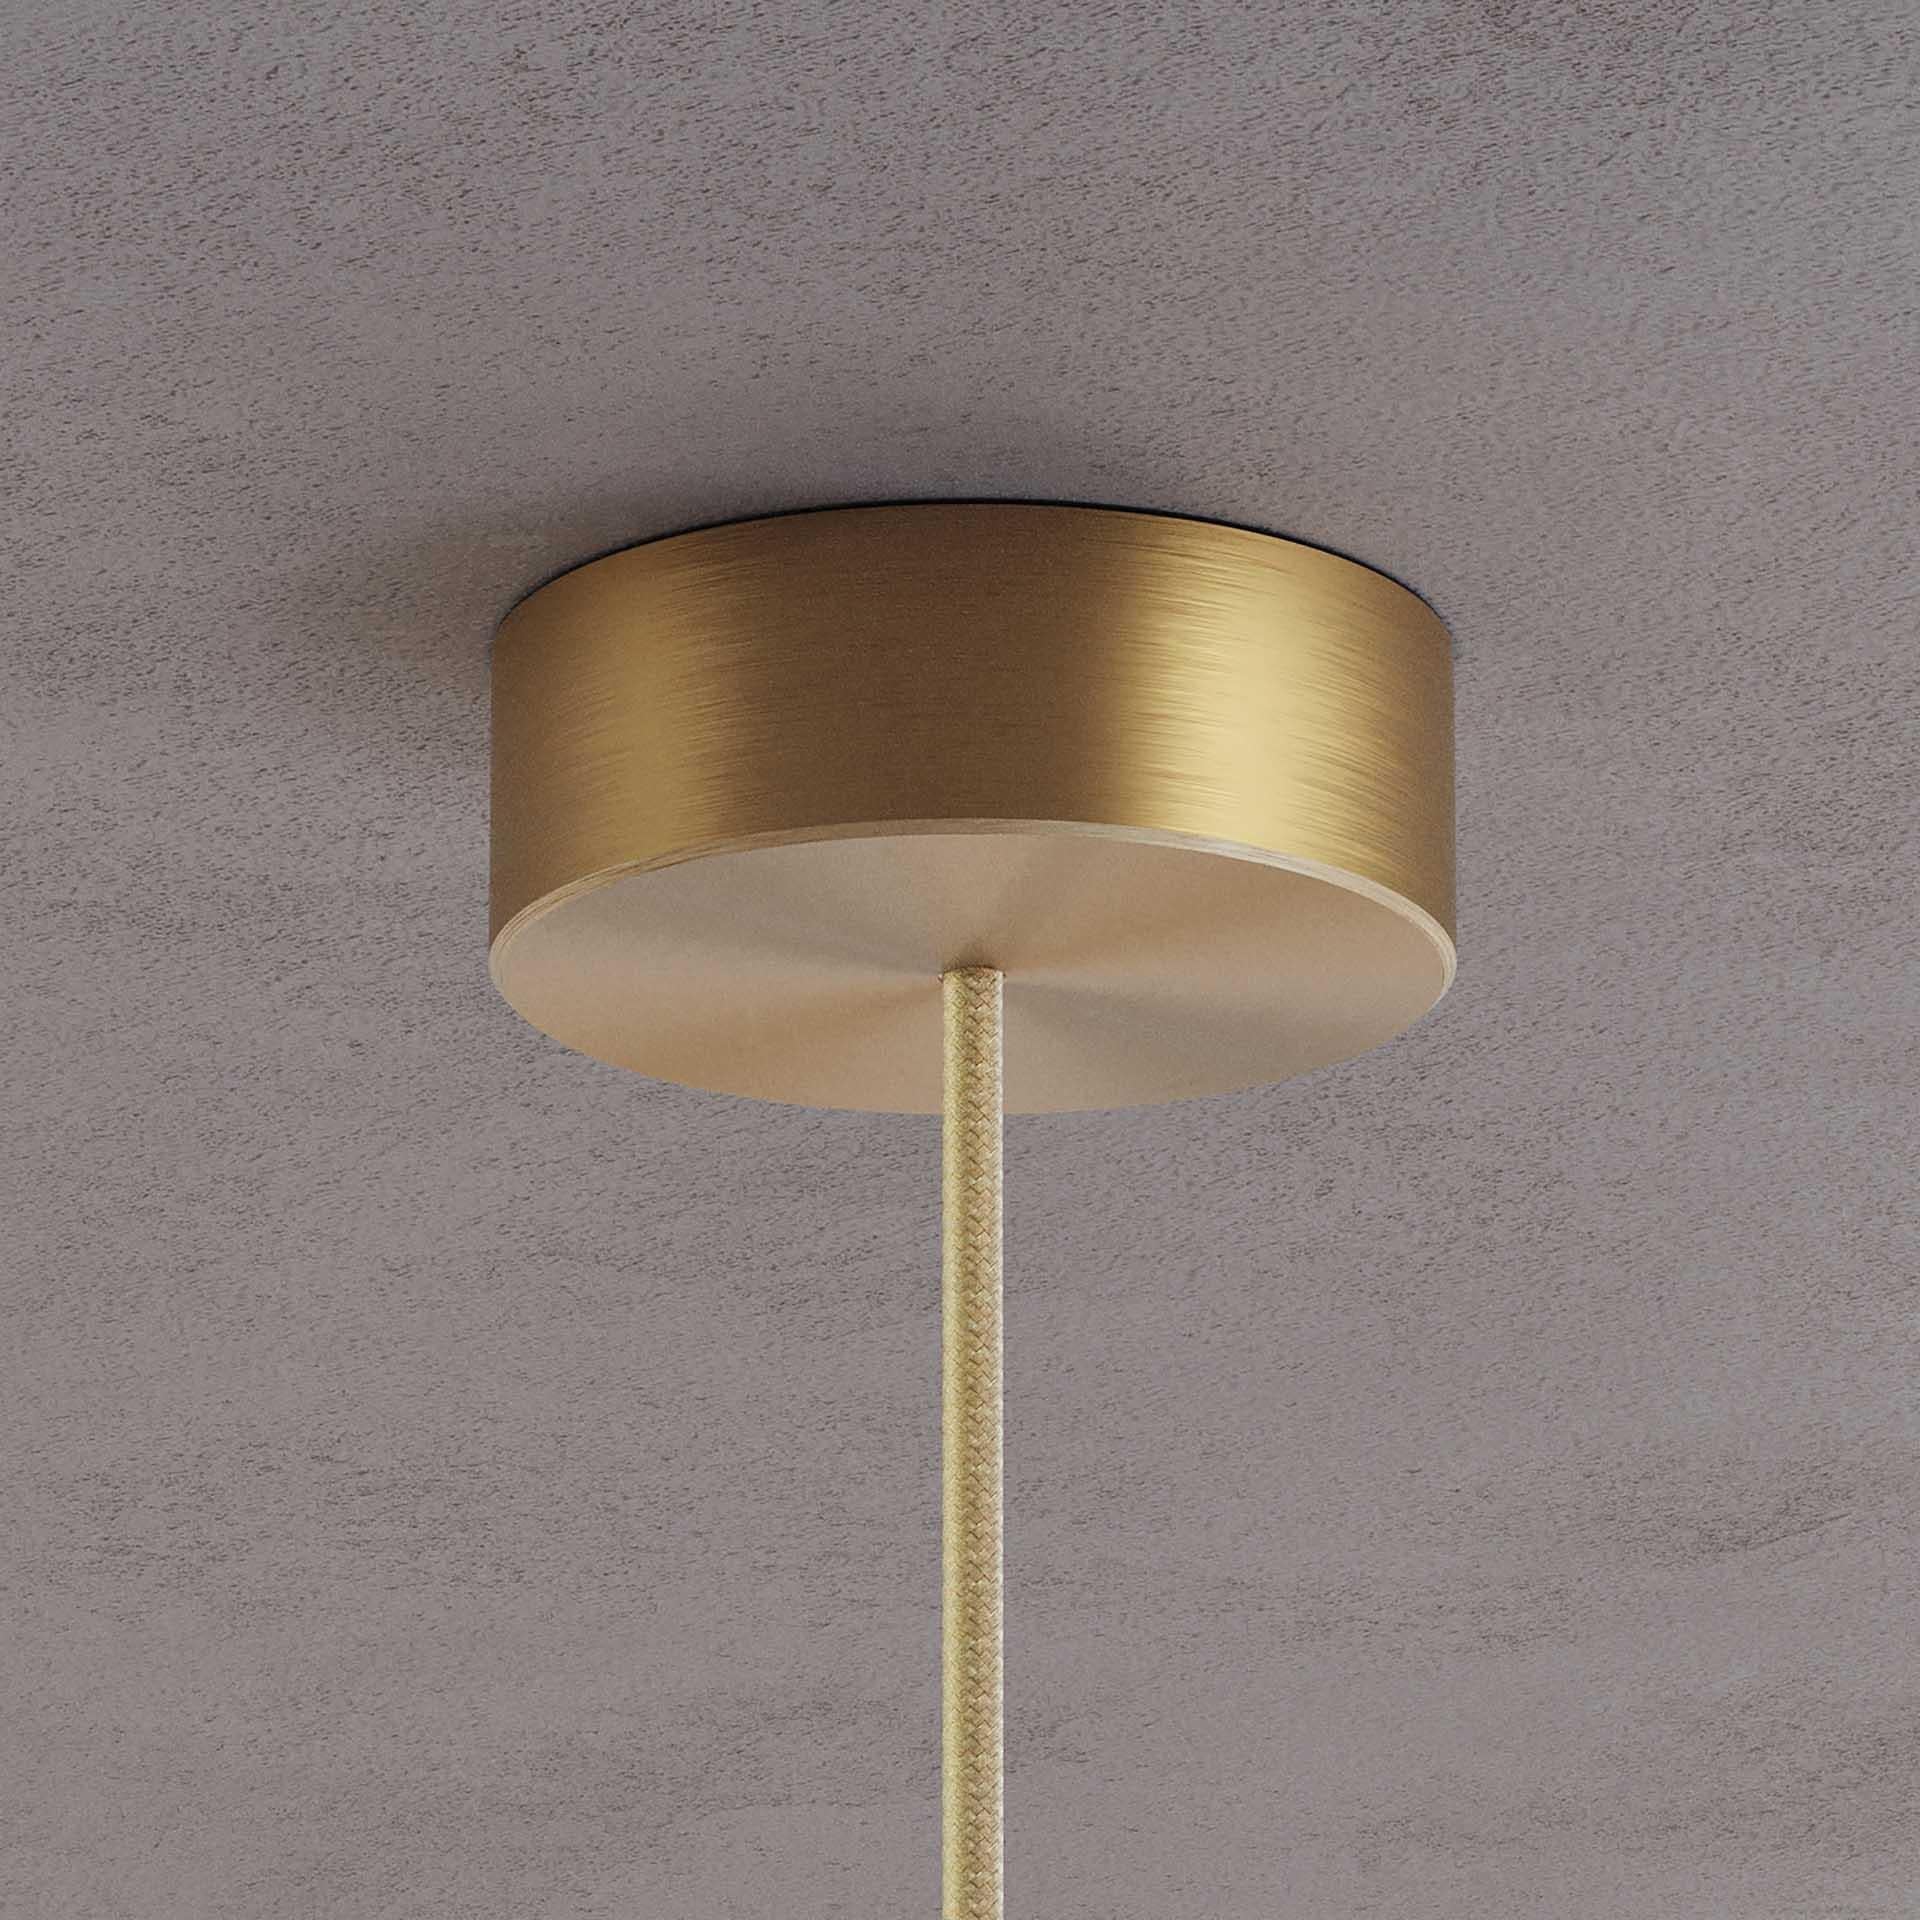 ‘Liquid Pendant Alabaster’ White Gradient Glass and Satin Brass Ceiling Light In New Condition For Sale In London, GB